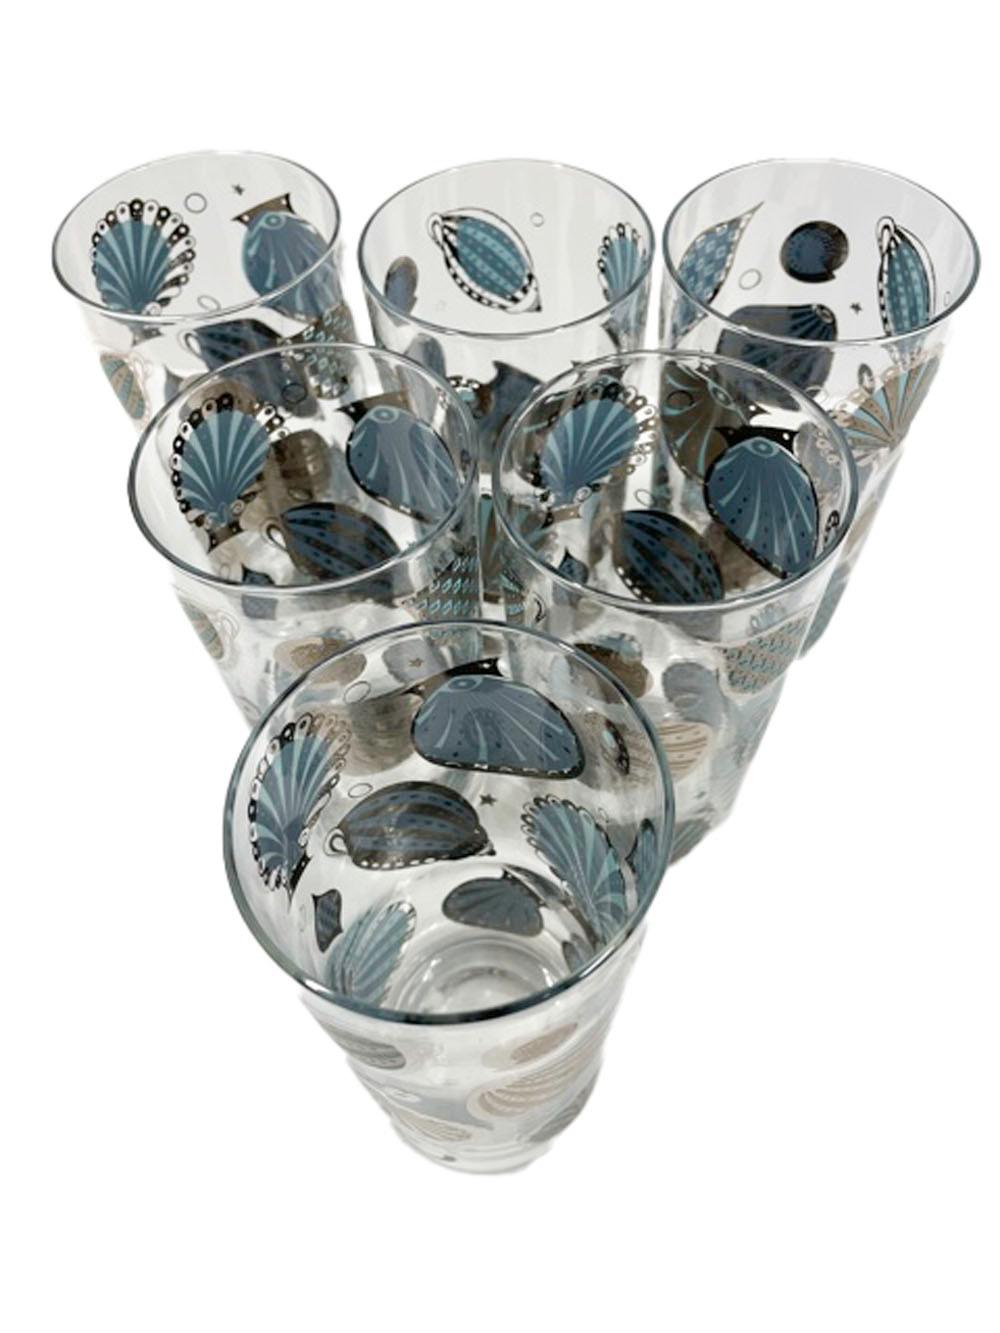 American Mid-Century Modern, Georges Briard Seascape Pattern Highball Glasses, in Silver